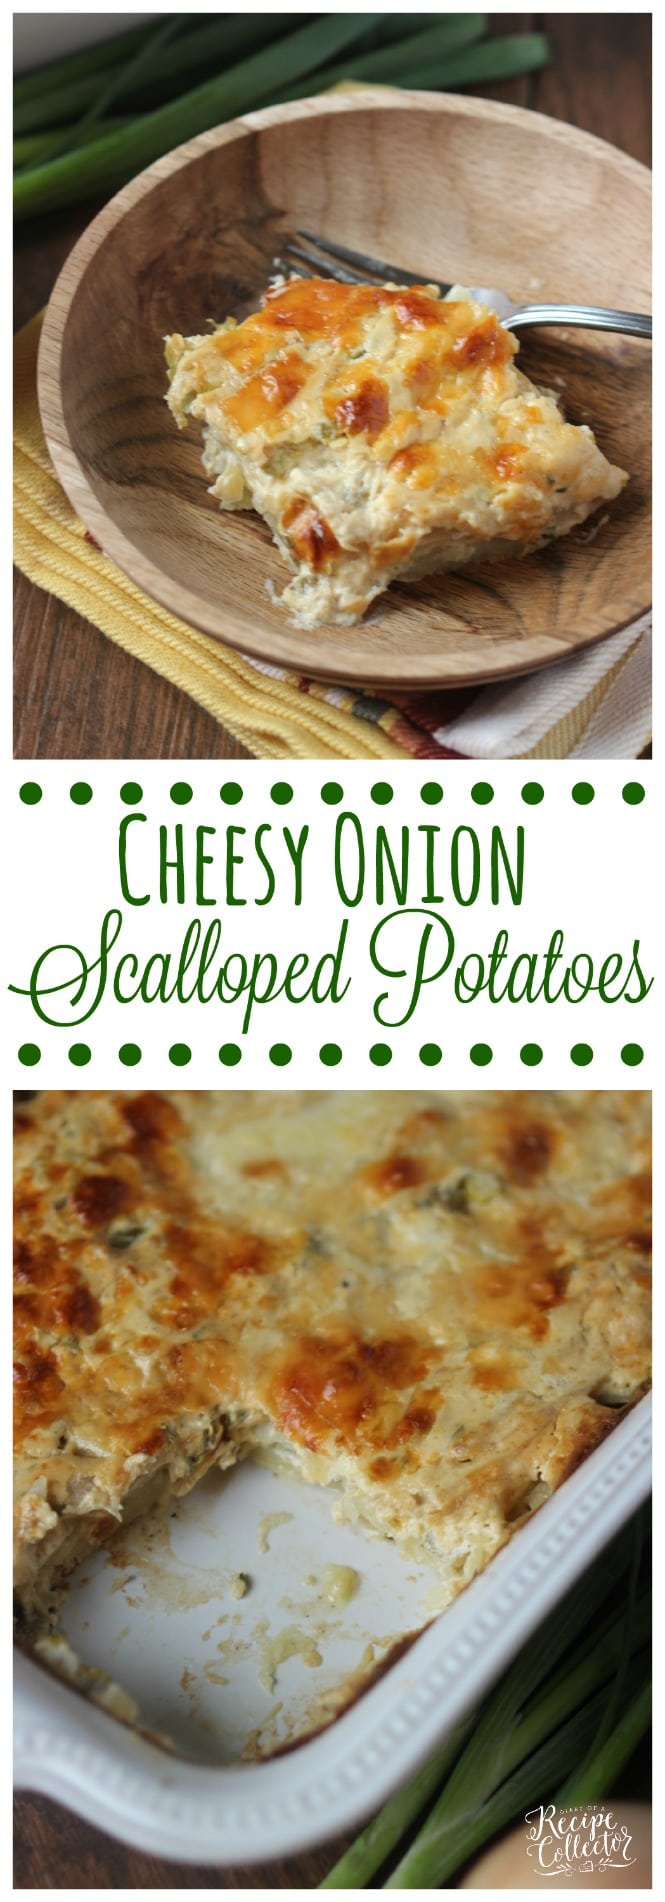 Cheesy Onion Scalloped Potatoes - Layers of thinly sliced potatoes in a rich and creamy sauce filled with caramelized onion flavor.